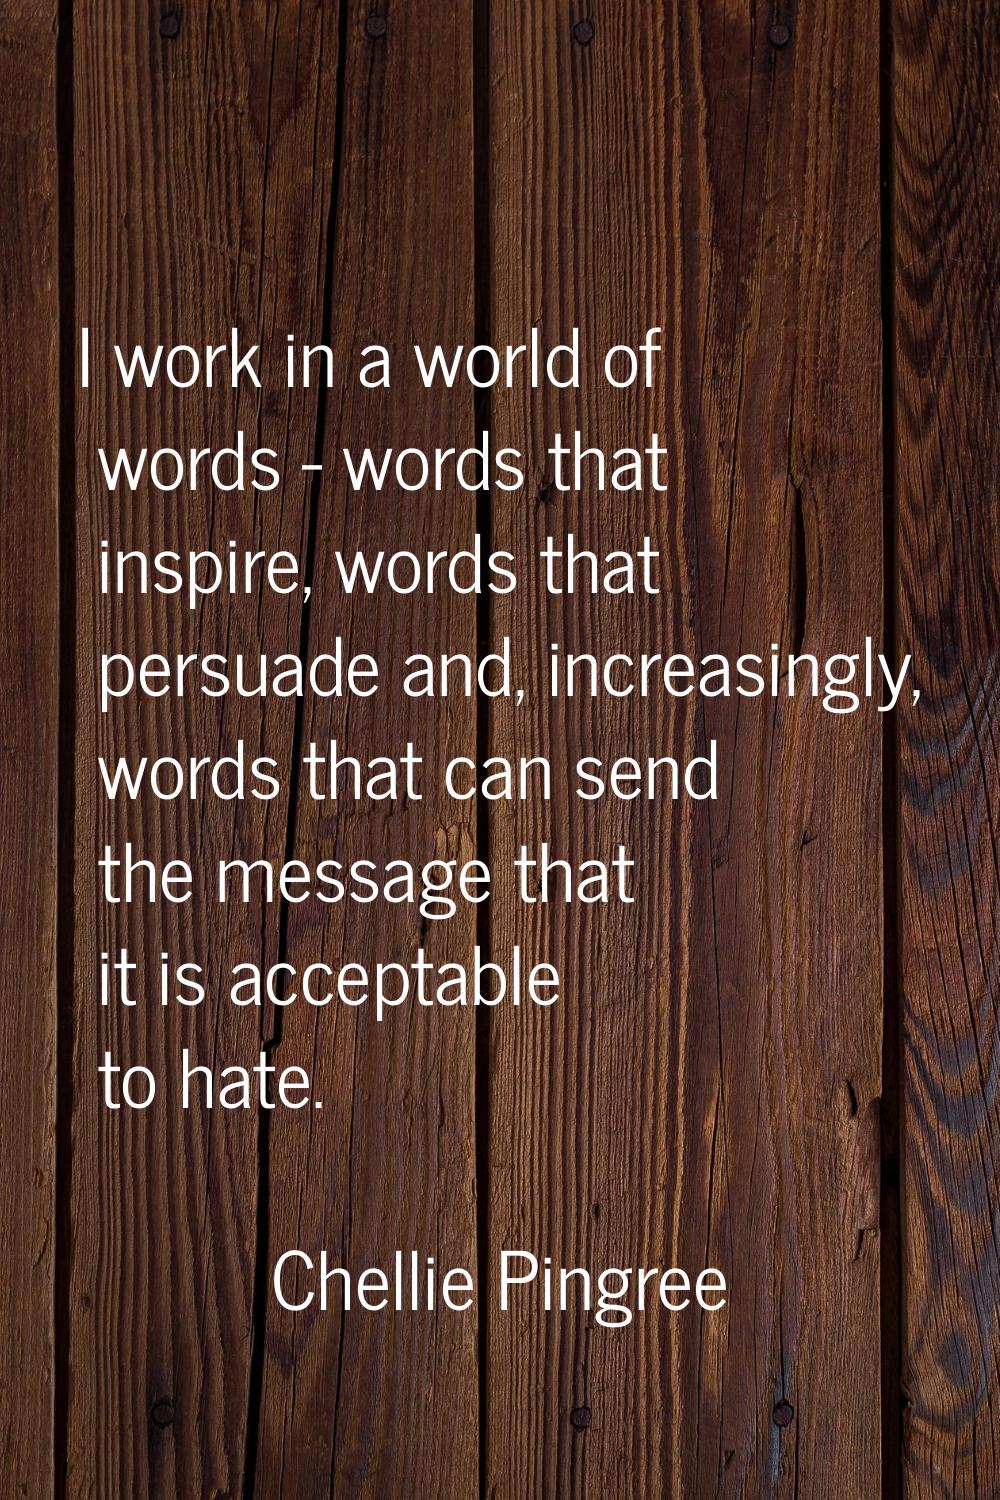 I work in a world of words - words that inspire, words that persuade and, increasingly, words that 